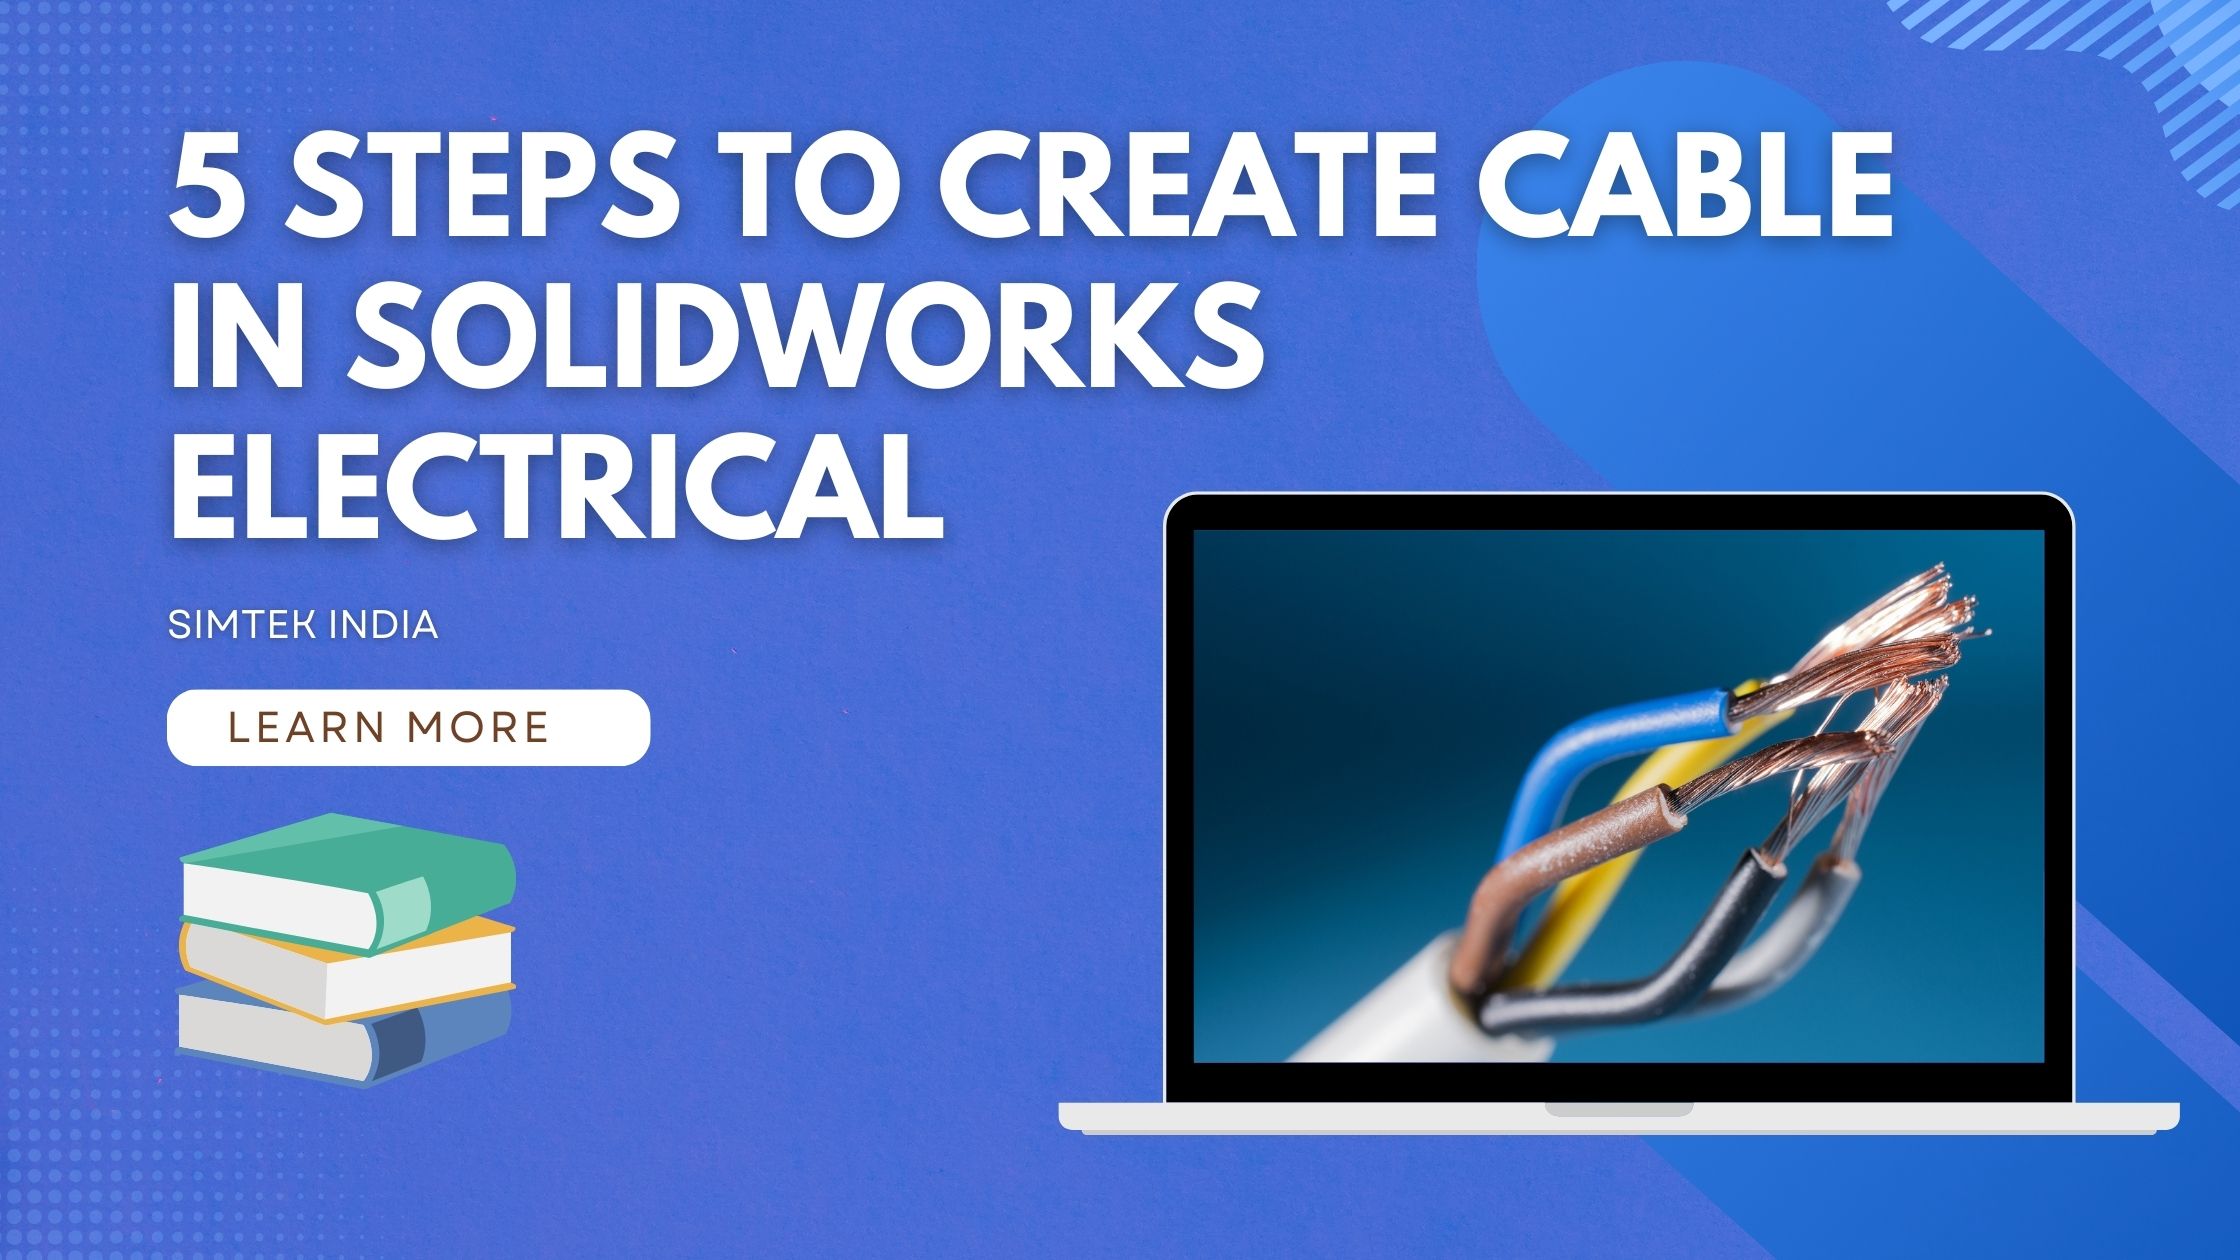 5 STEPS TO CREATE CABLE IN SOLIDWORKS ELECTRICAL